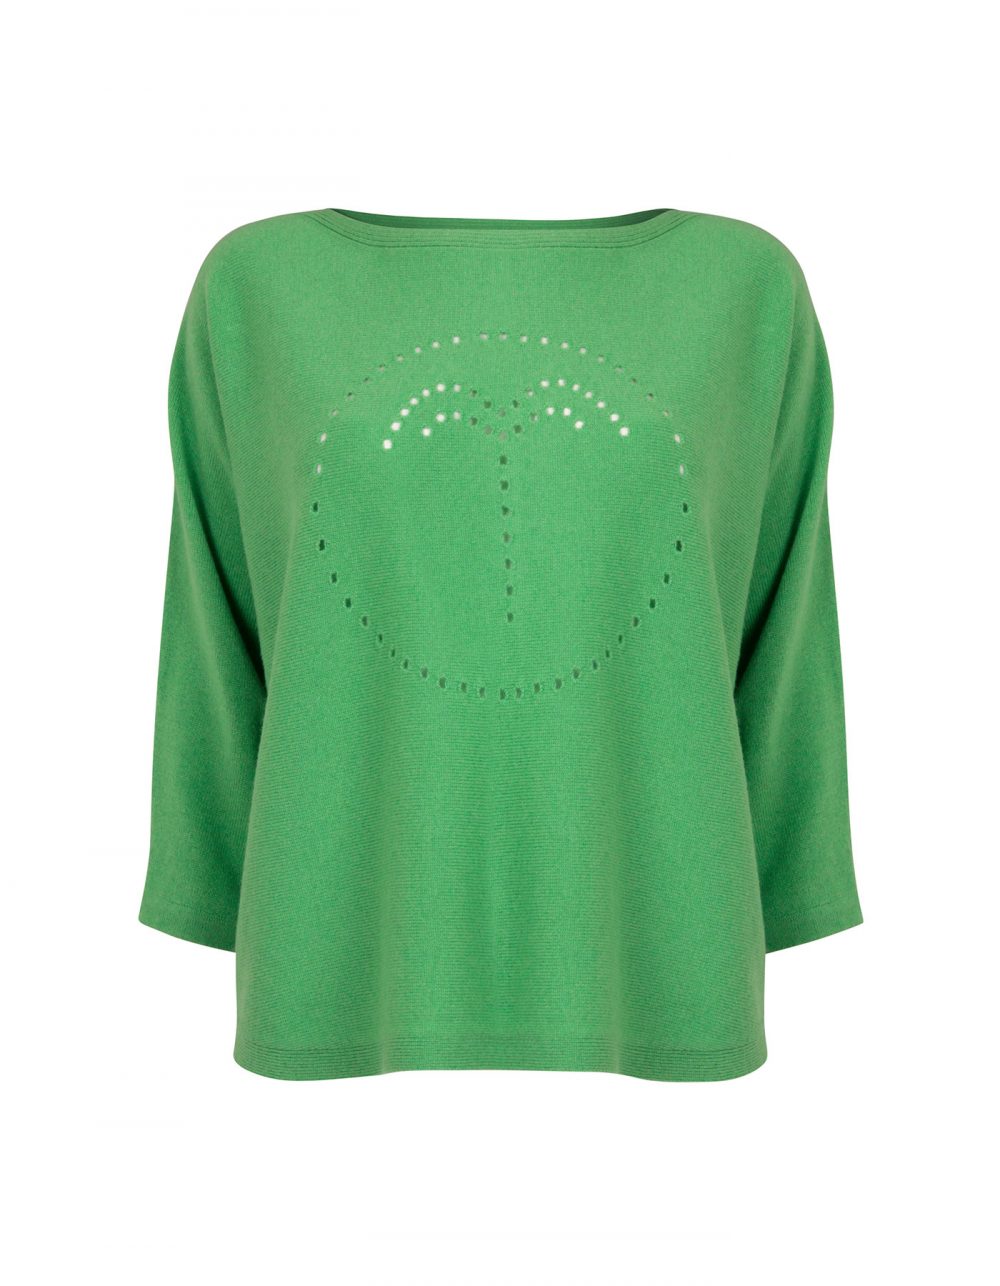 A palm jumper in pitch green, part of the malin darlin range of designer cashmere jumpers, on a white background.